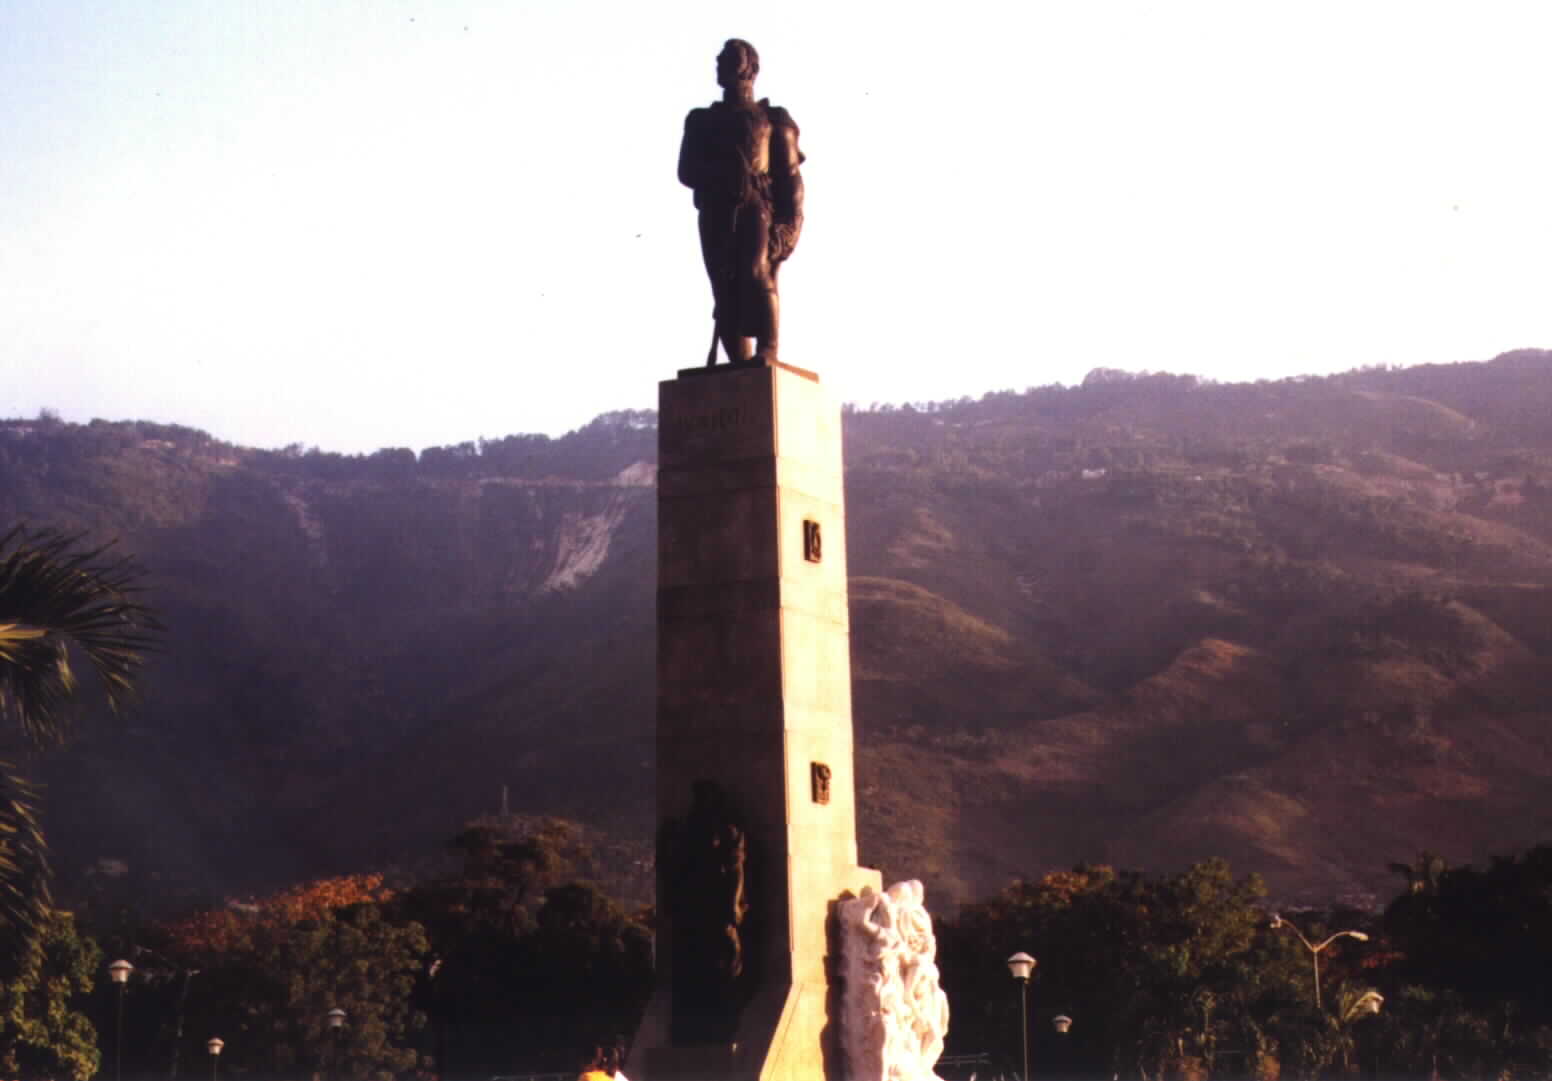 (Photographed by Noe' Dorestant: Statue of Alexandre Petion (Father of the Panamericanism), in Port-au-Prince, Haiti)Picture photographed
on January 28th, 2001 and provided by Noe Dorestant, if you copy for reuse, give credit where credit is
due. 